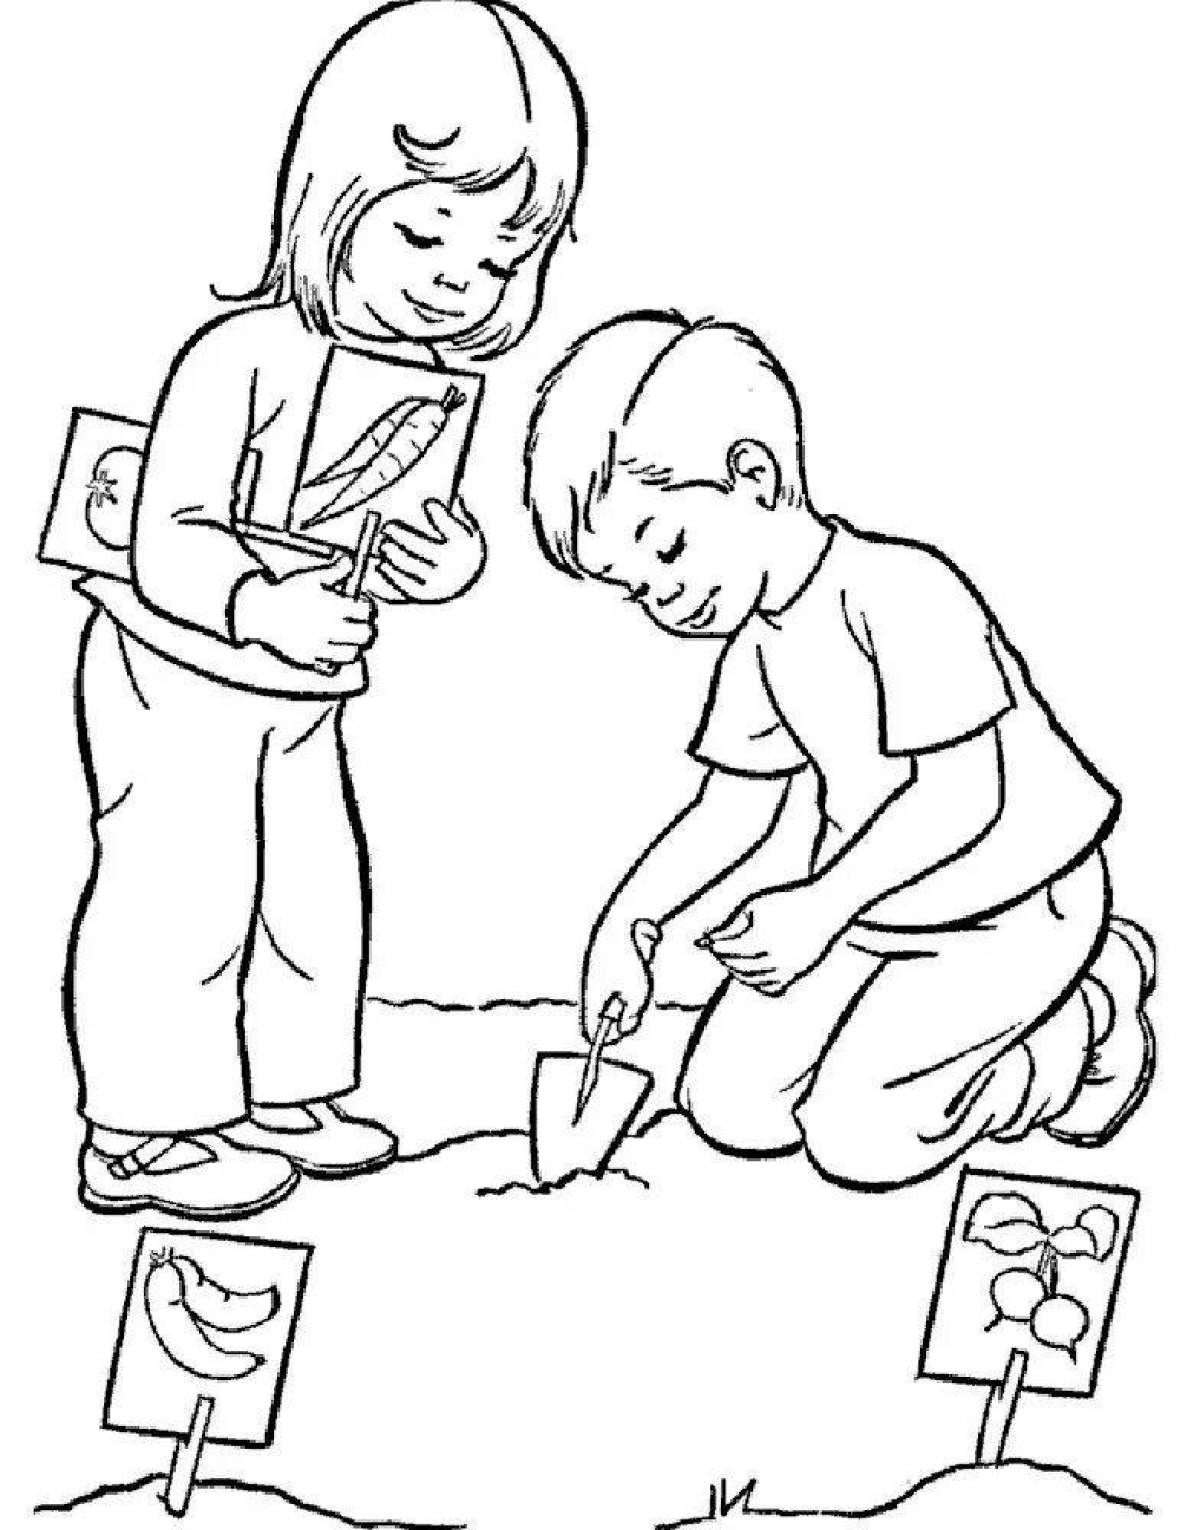 Amazing deeds for kids coloring pages